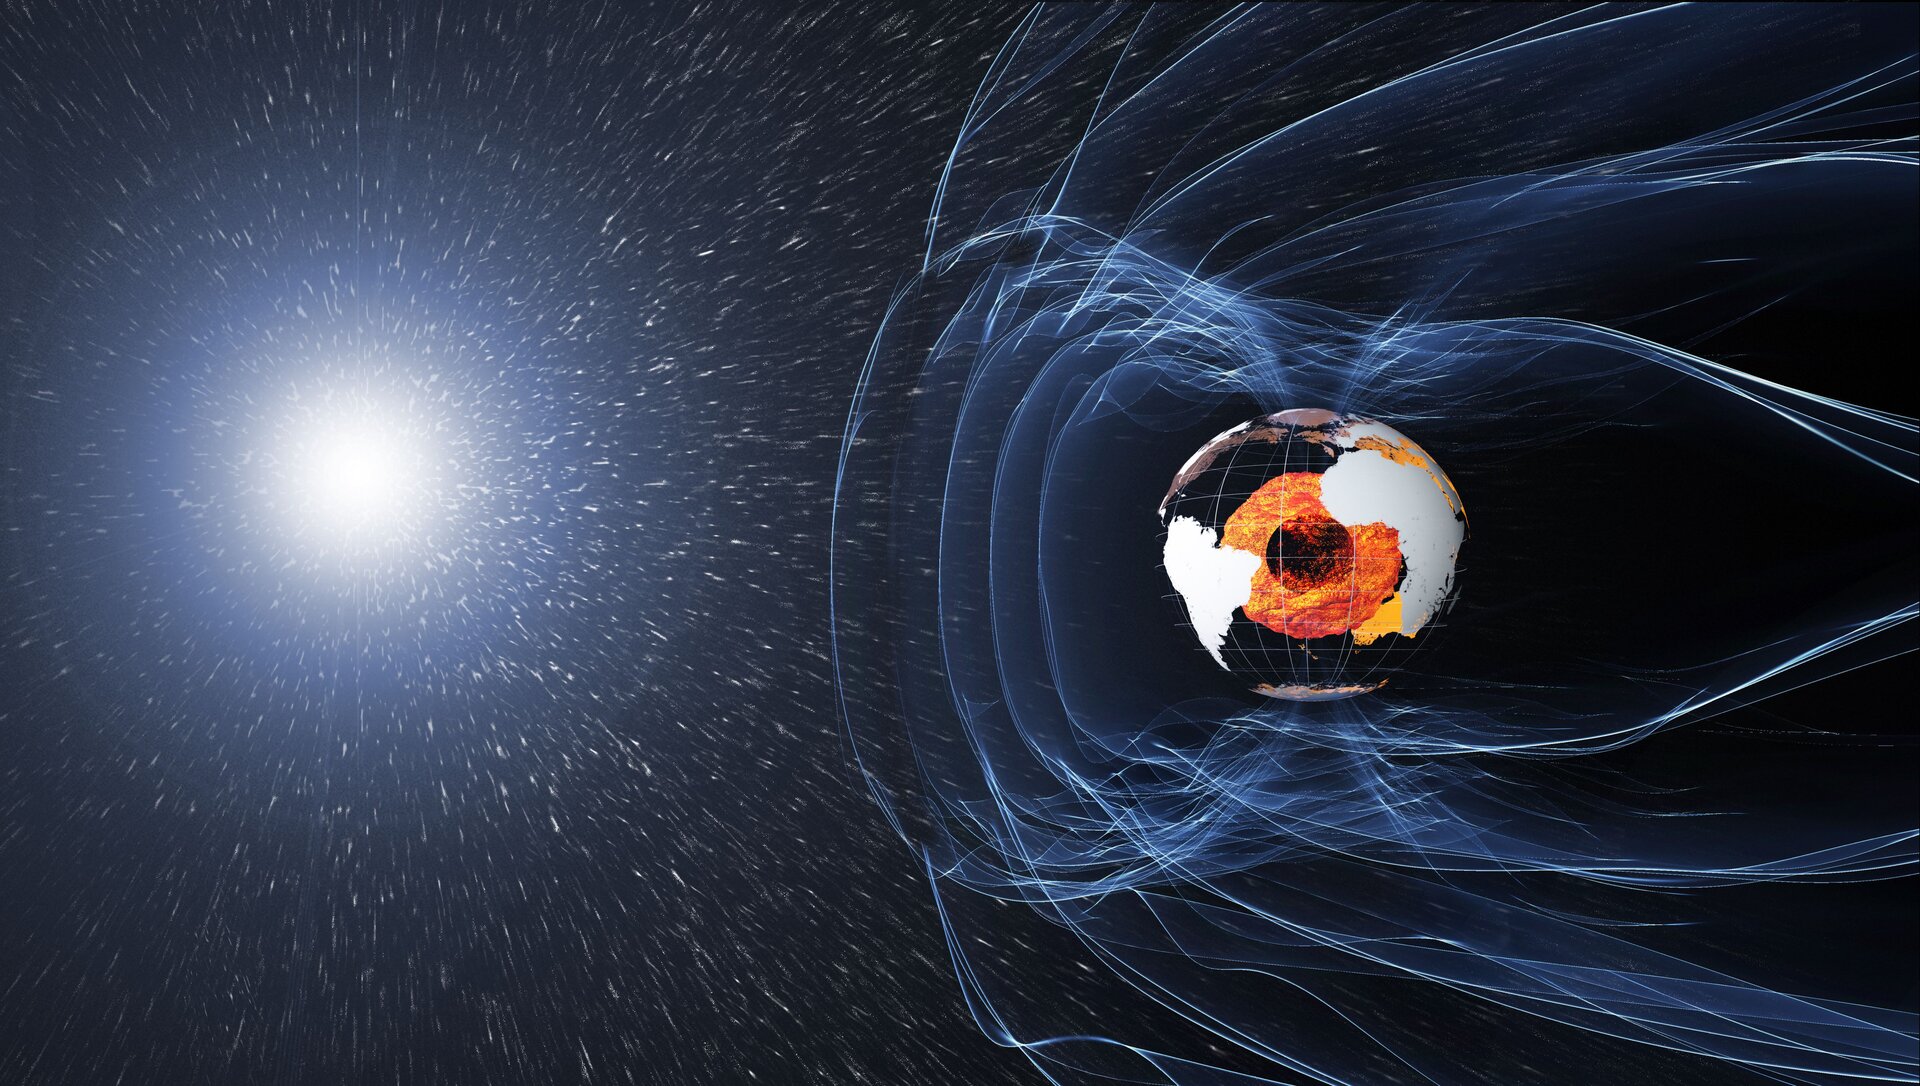 An illustration of the magnetic field of the Earth. Image Credit: ESA/ATG medialab.